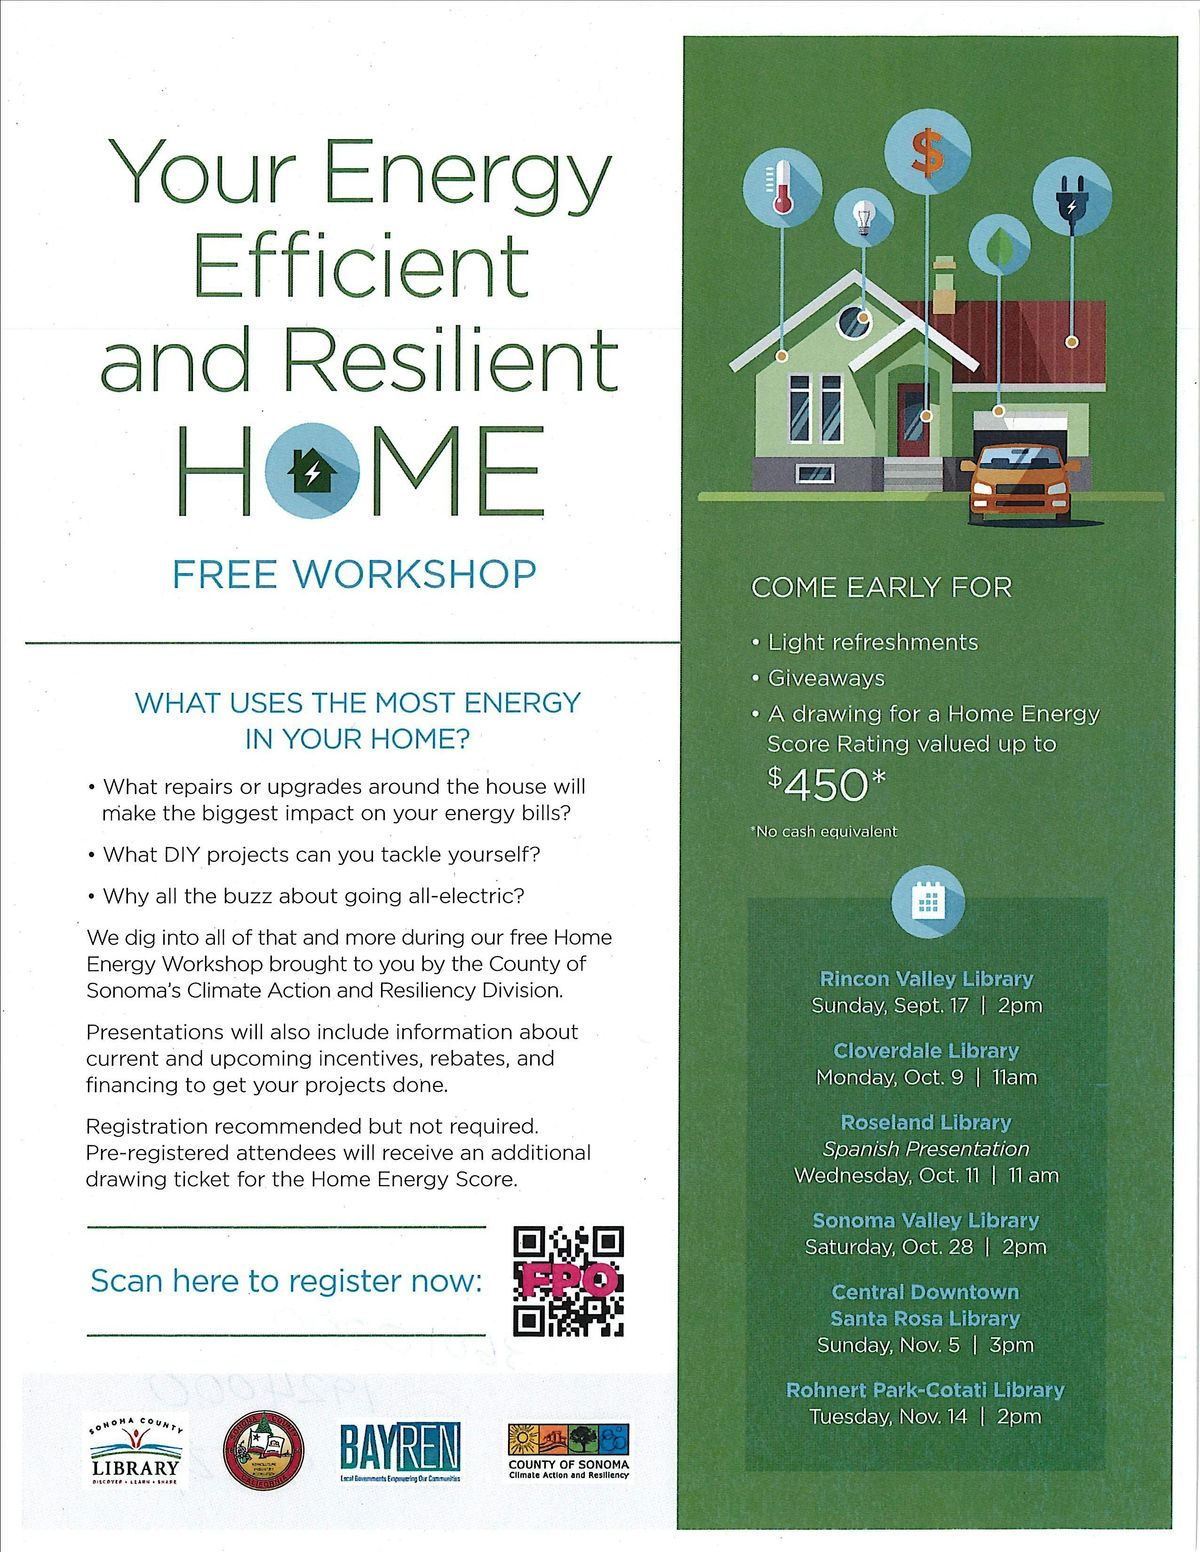 Your Energy Efficient and Resilient Home